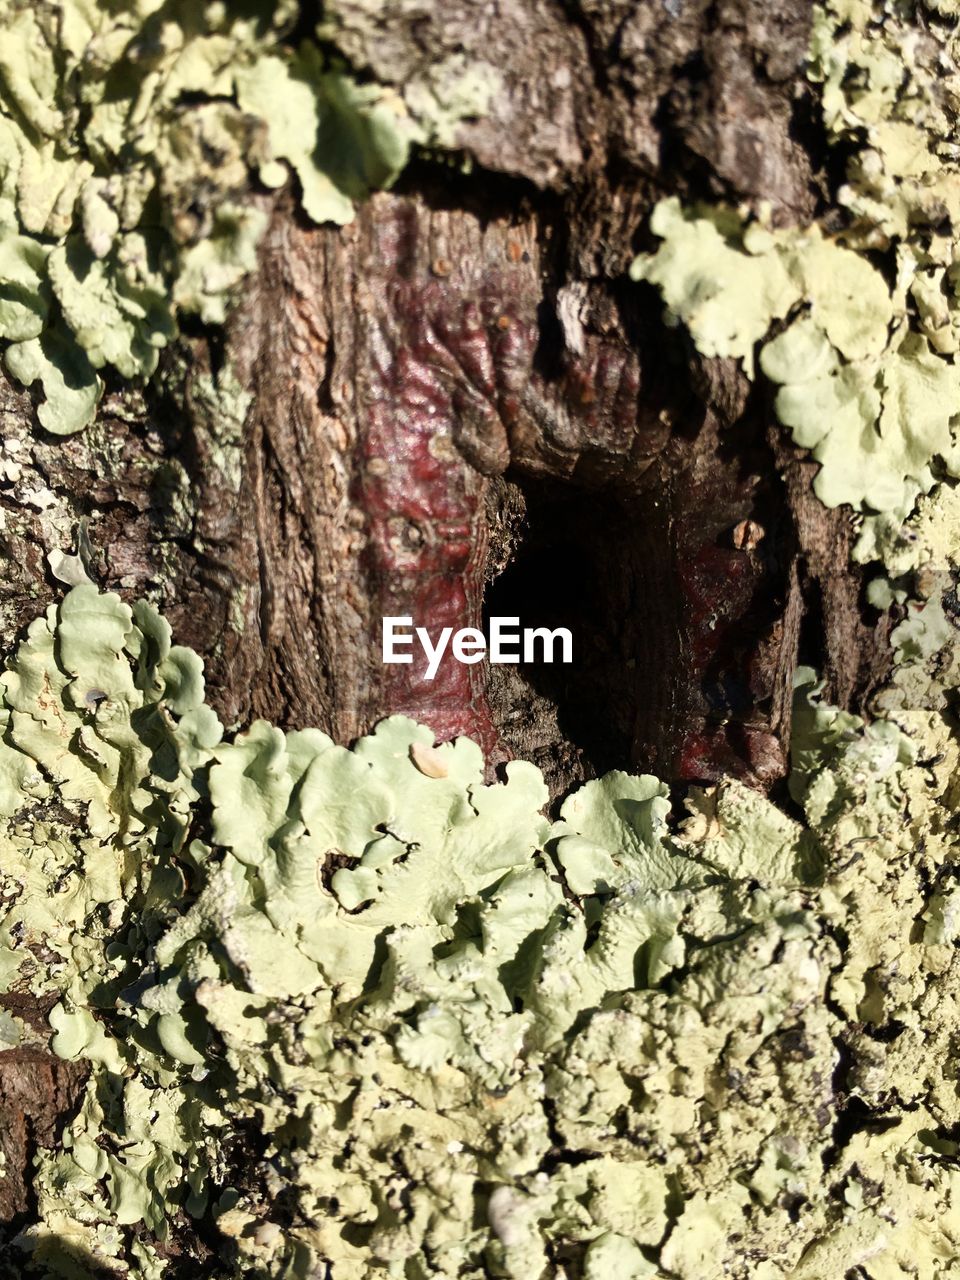 FULL FRAME SHOT OF TREE TRUNK WITH HOLE IN BACKGROUND